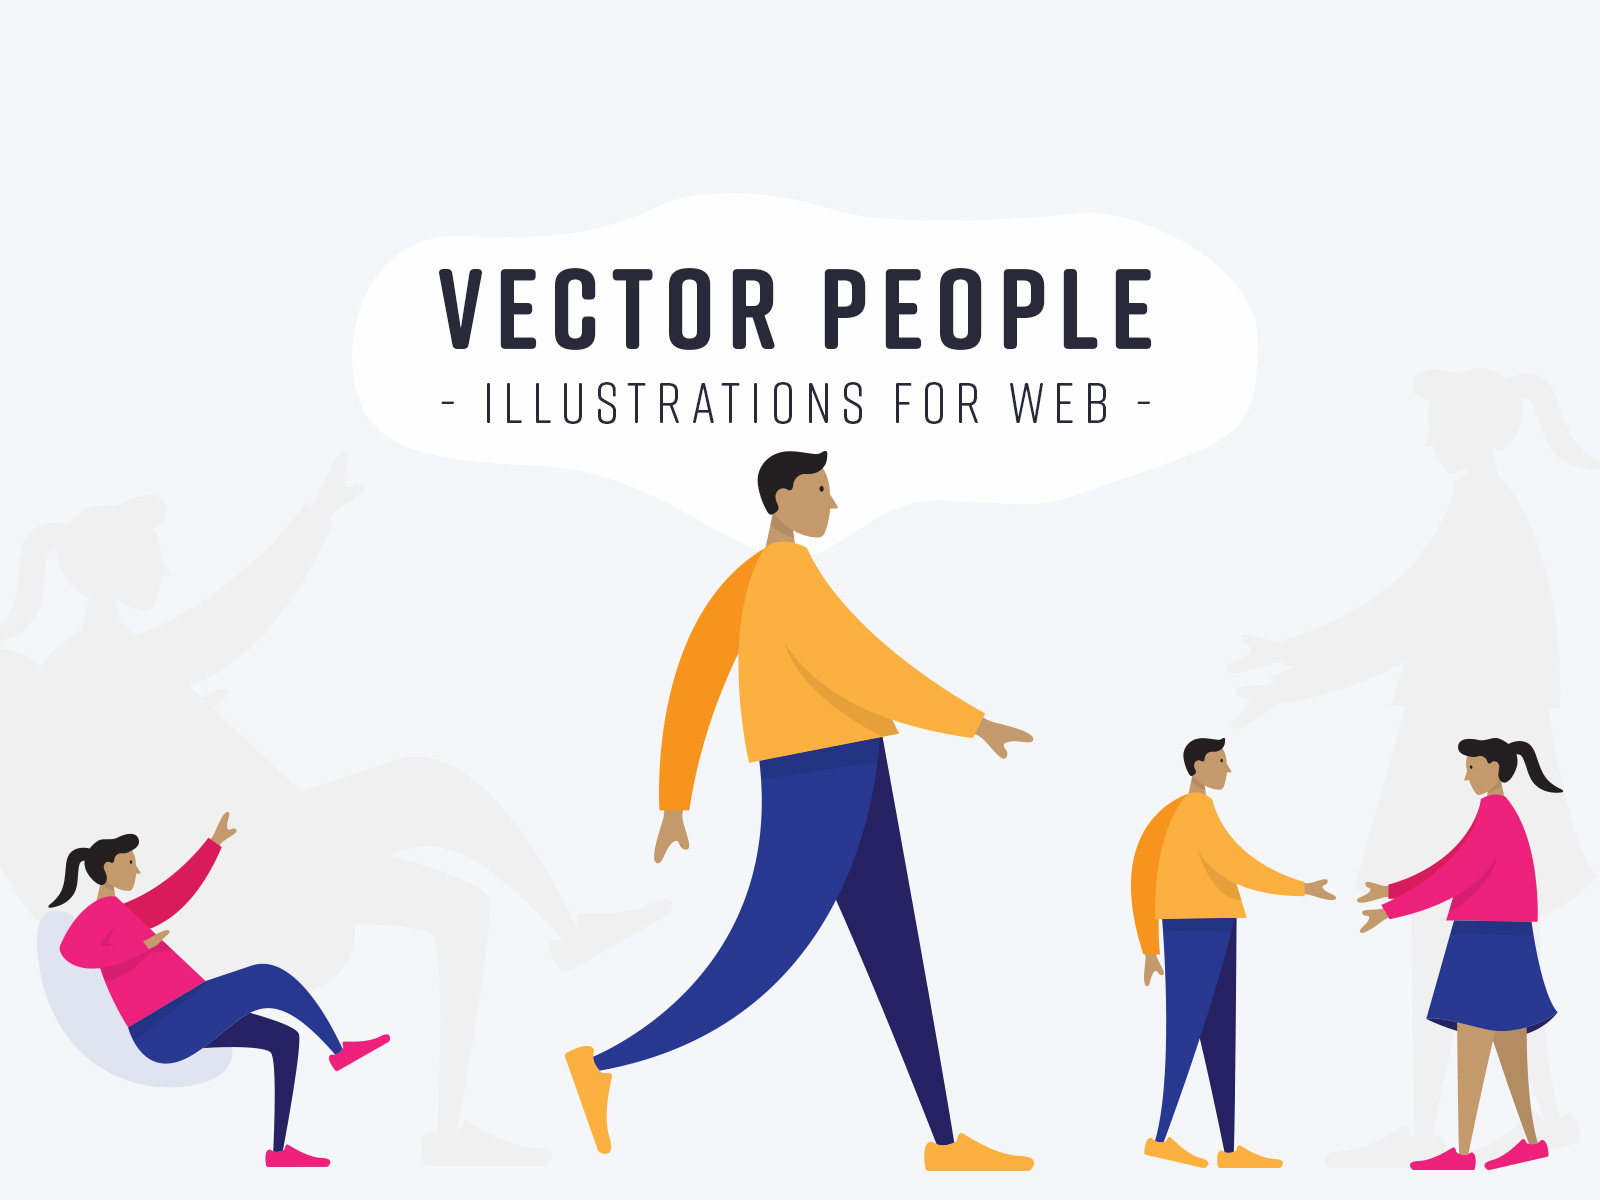 Vector People: Illustrations for Web by Diego Sanchez for Medialoot on ...